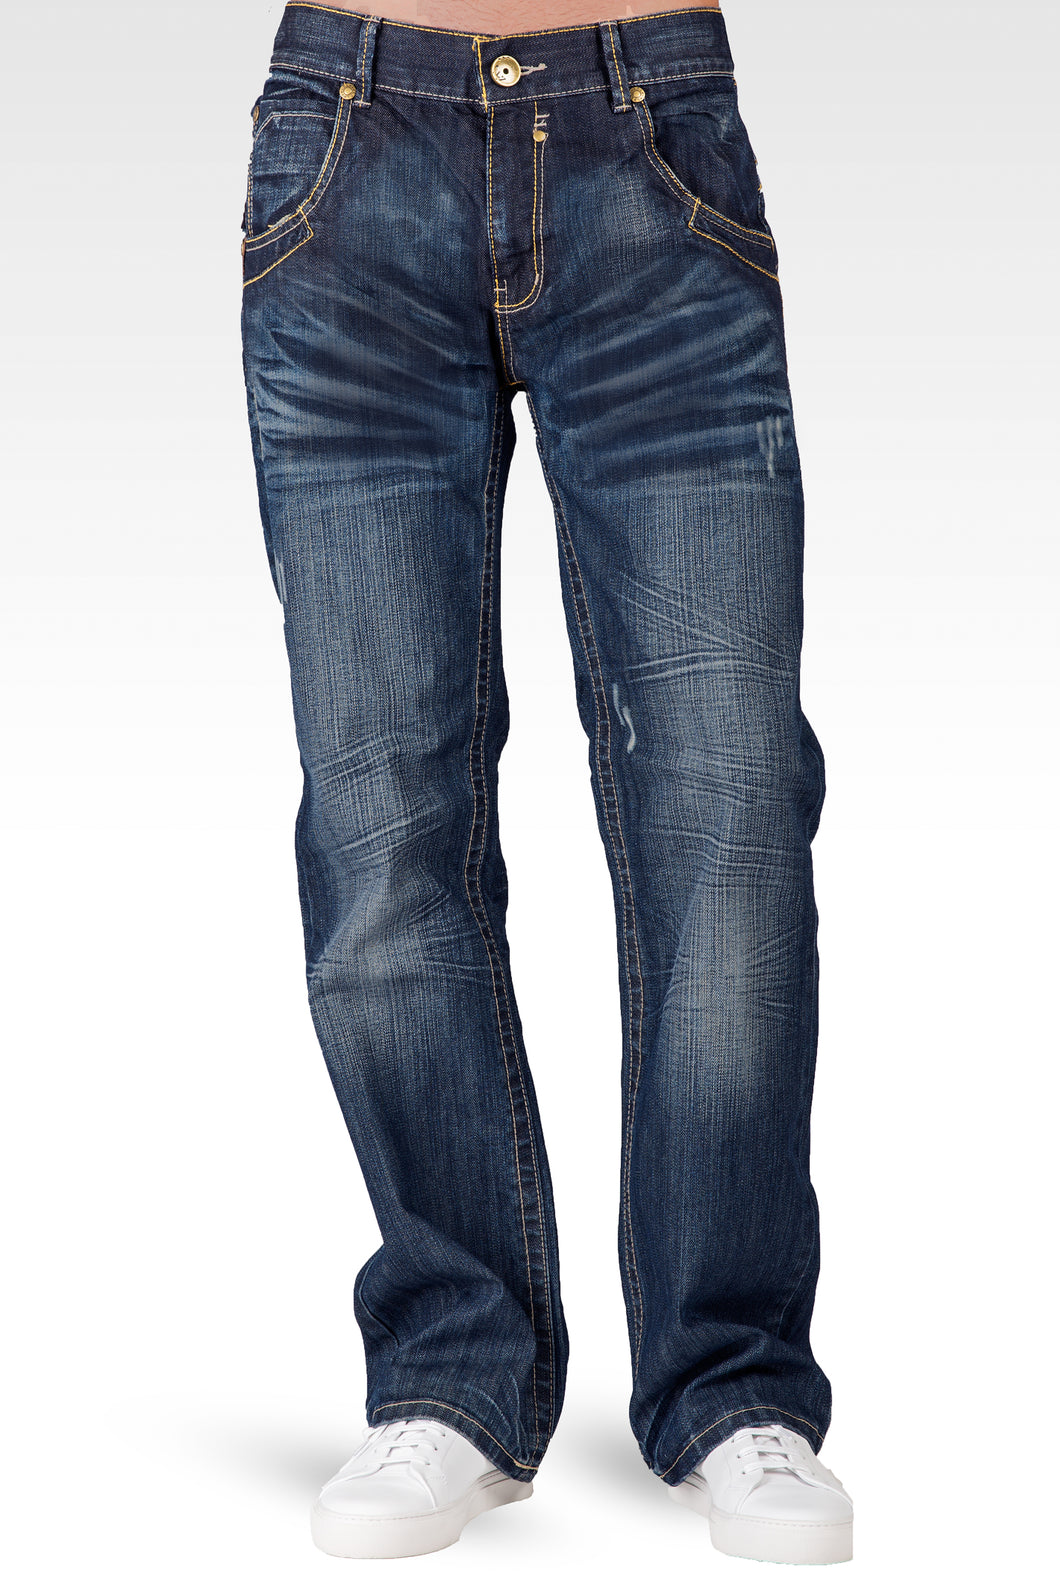 Level 7 Men's Zipper Utility Pocket Relaxed Bootcut Distressed Jean ...